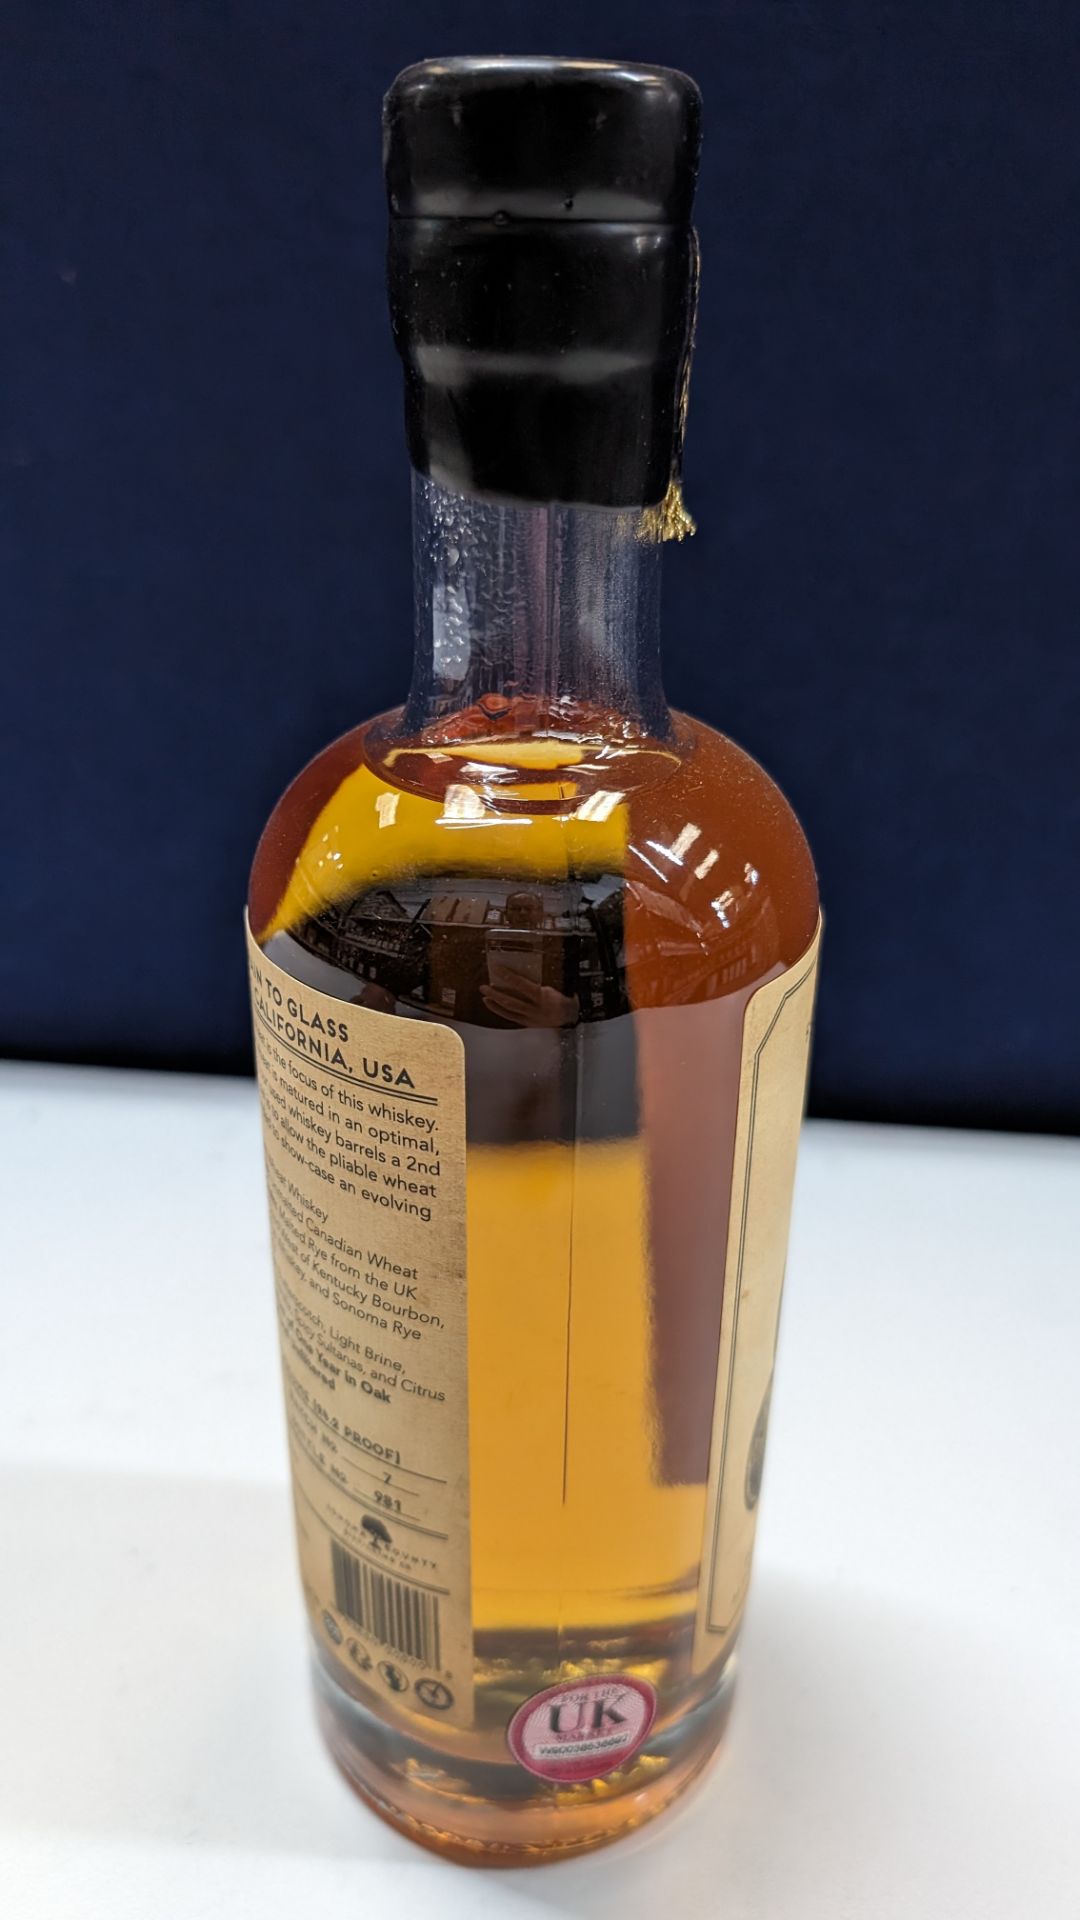 1 off 700ml bottle of Sonoma County 2nd Chance Wheat Double Alembic Pot Distilled Whiskey. 47.1% al - Image 4 of 6